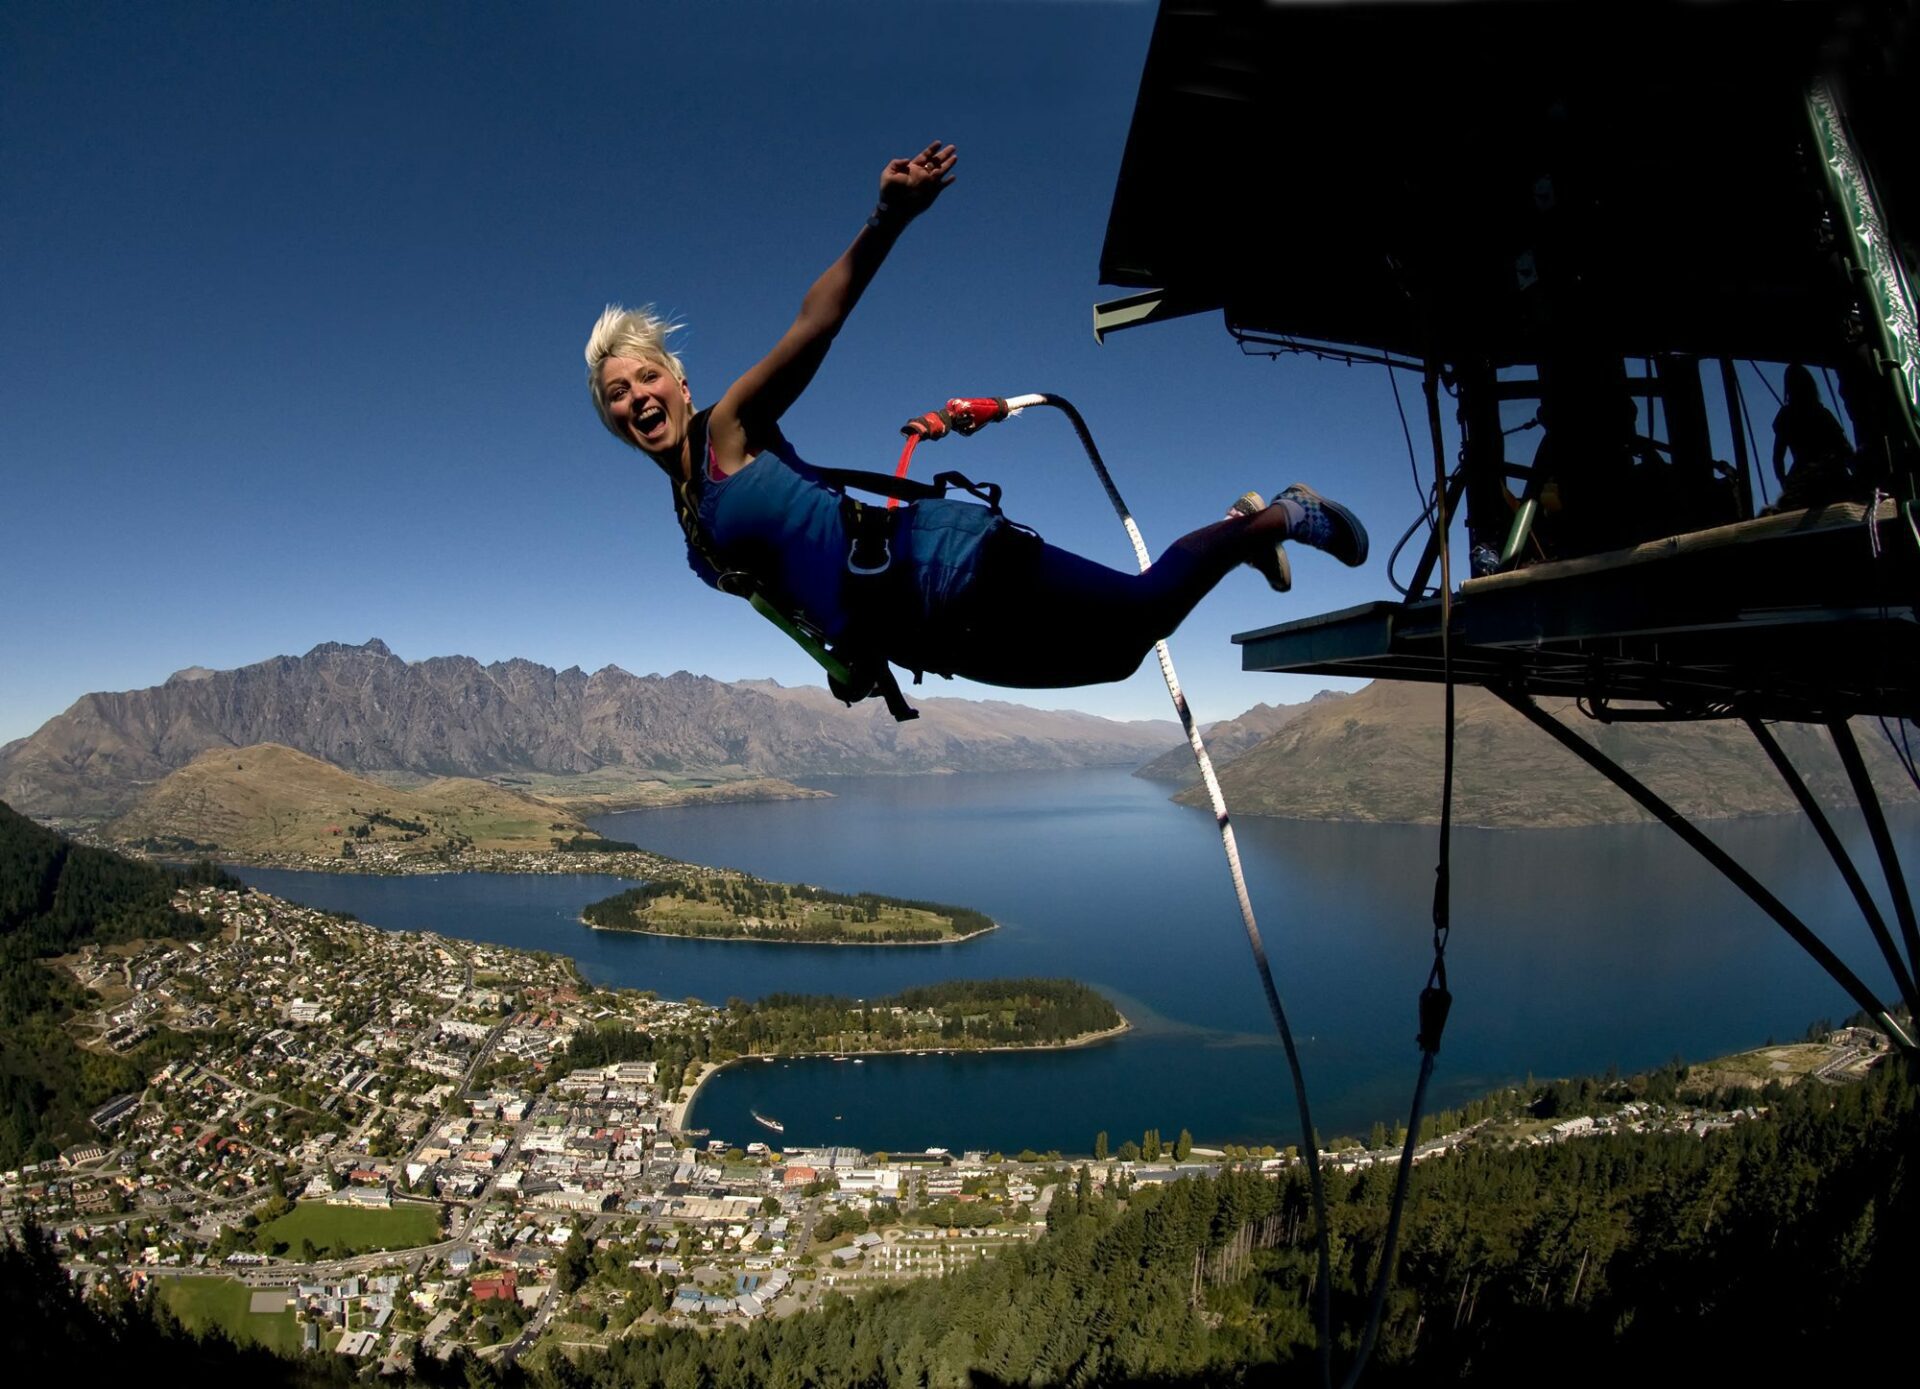 Woman looks at the camera as she bungee jumps off the platform in Queenstown